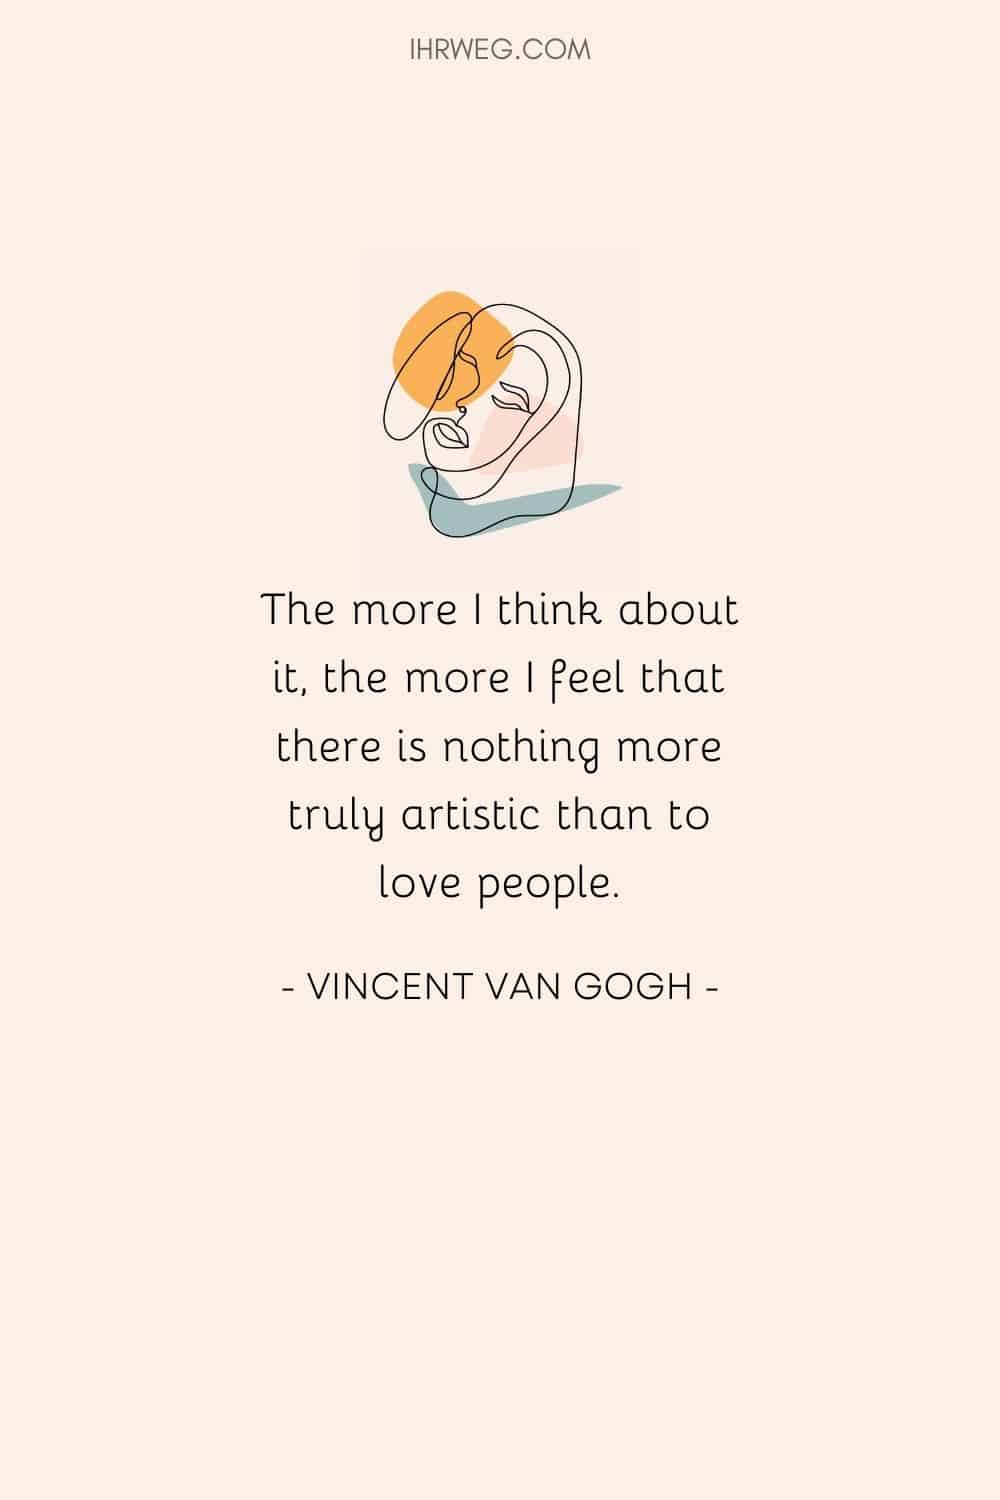 The more I think about it, the more I feel that there is nothing more truly artistic than to love people.